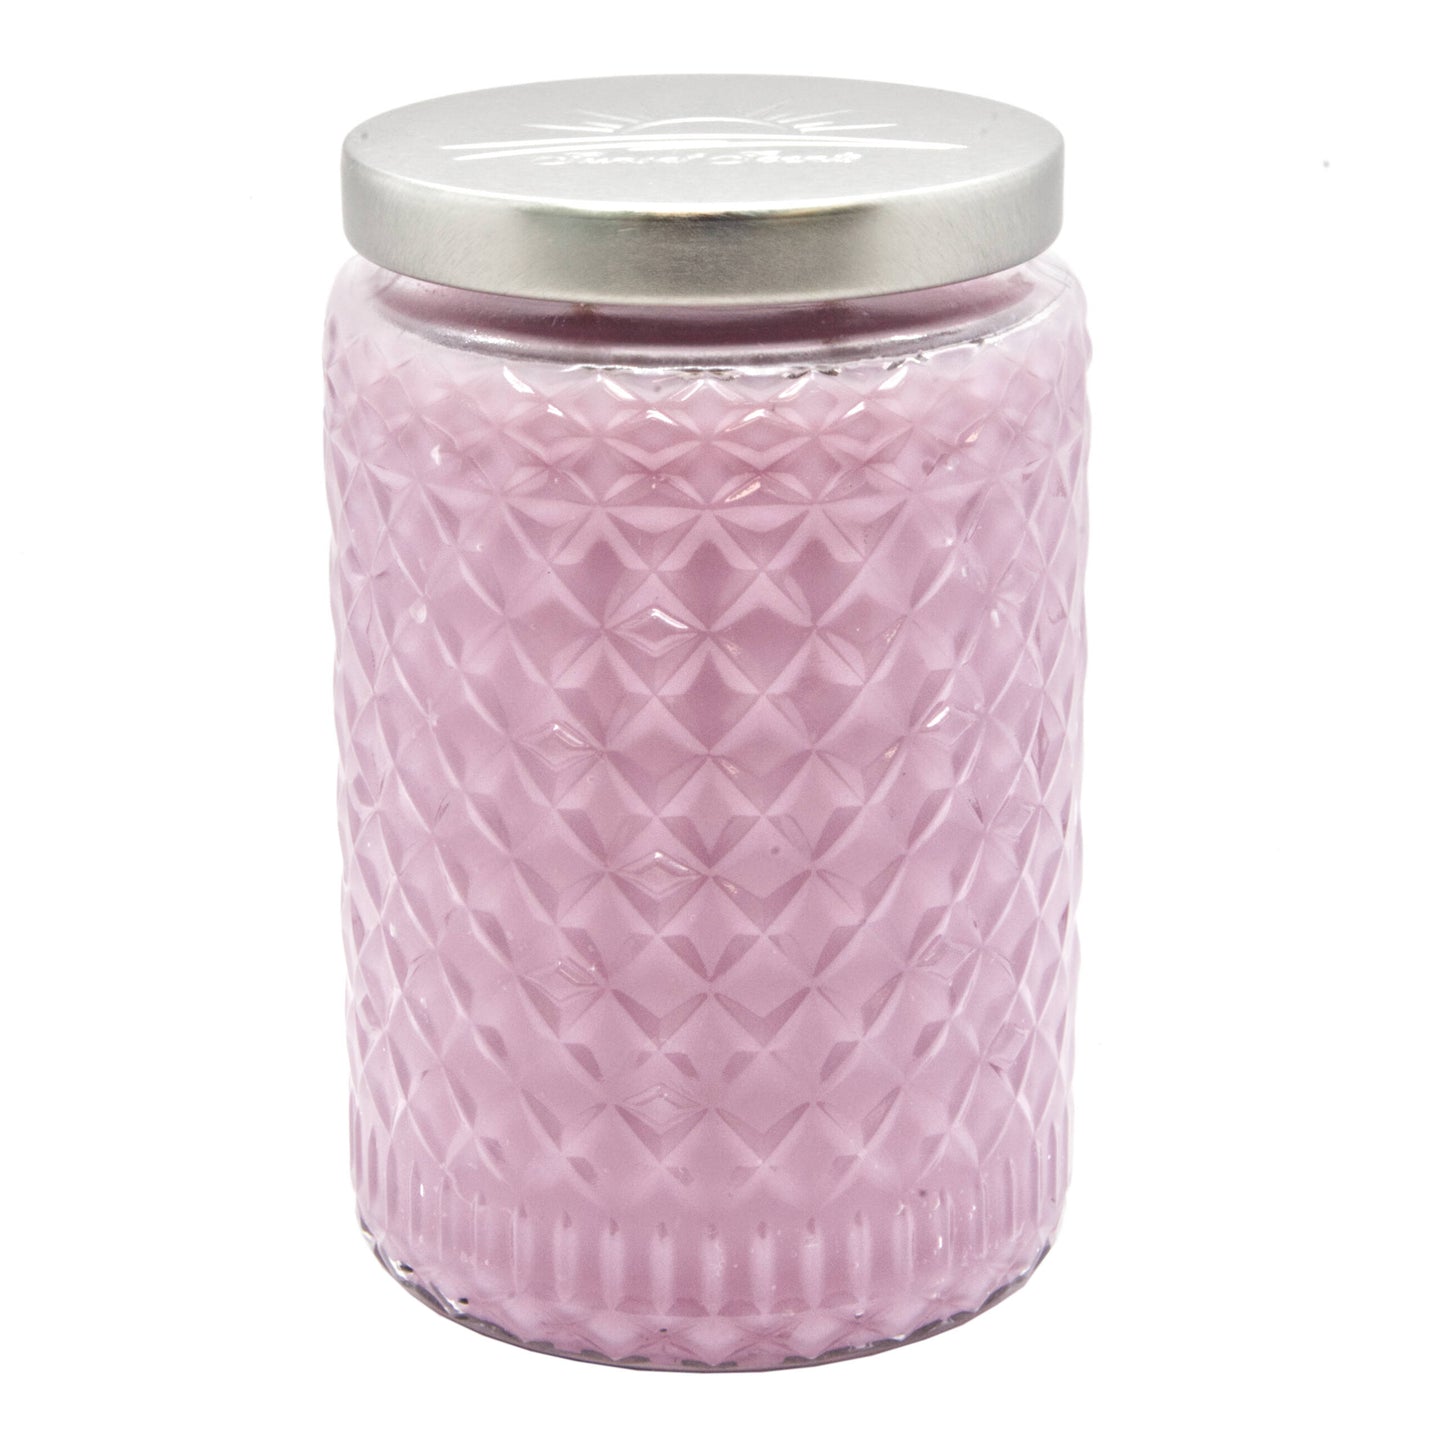 Hey, Sweet Pea Scented Candle